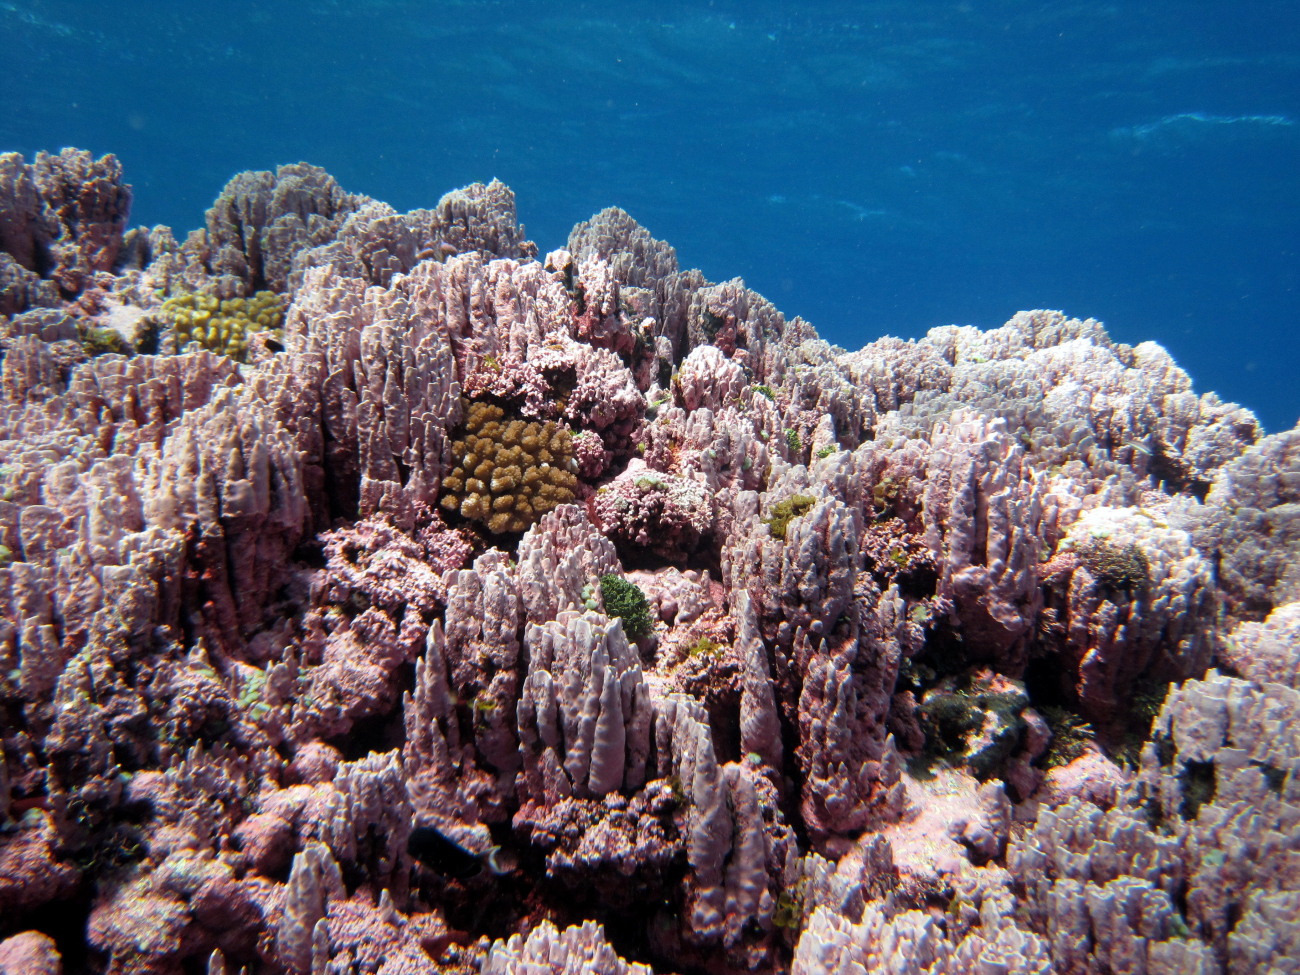 Scleractinian corals